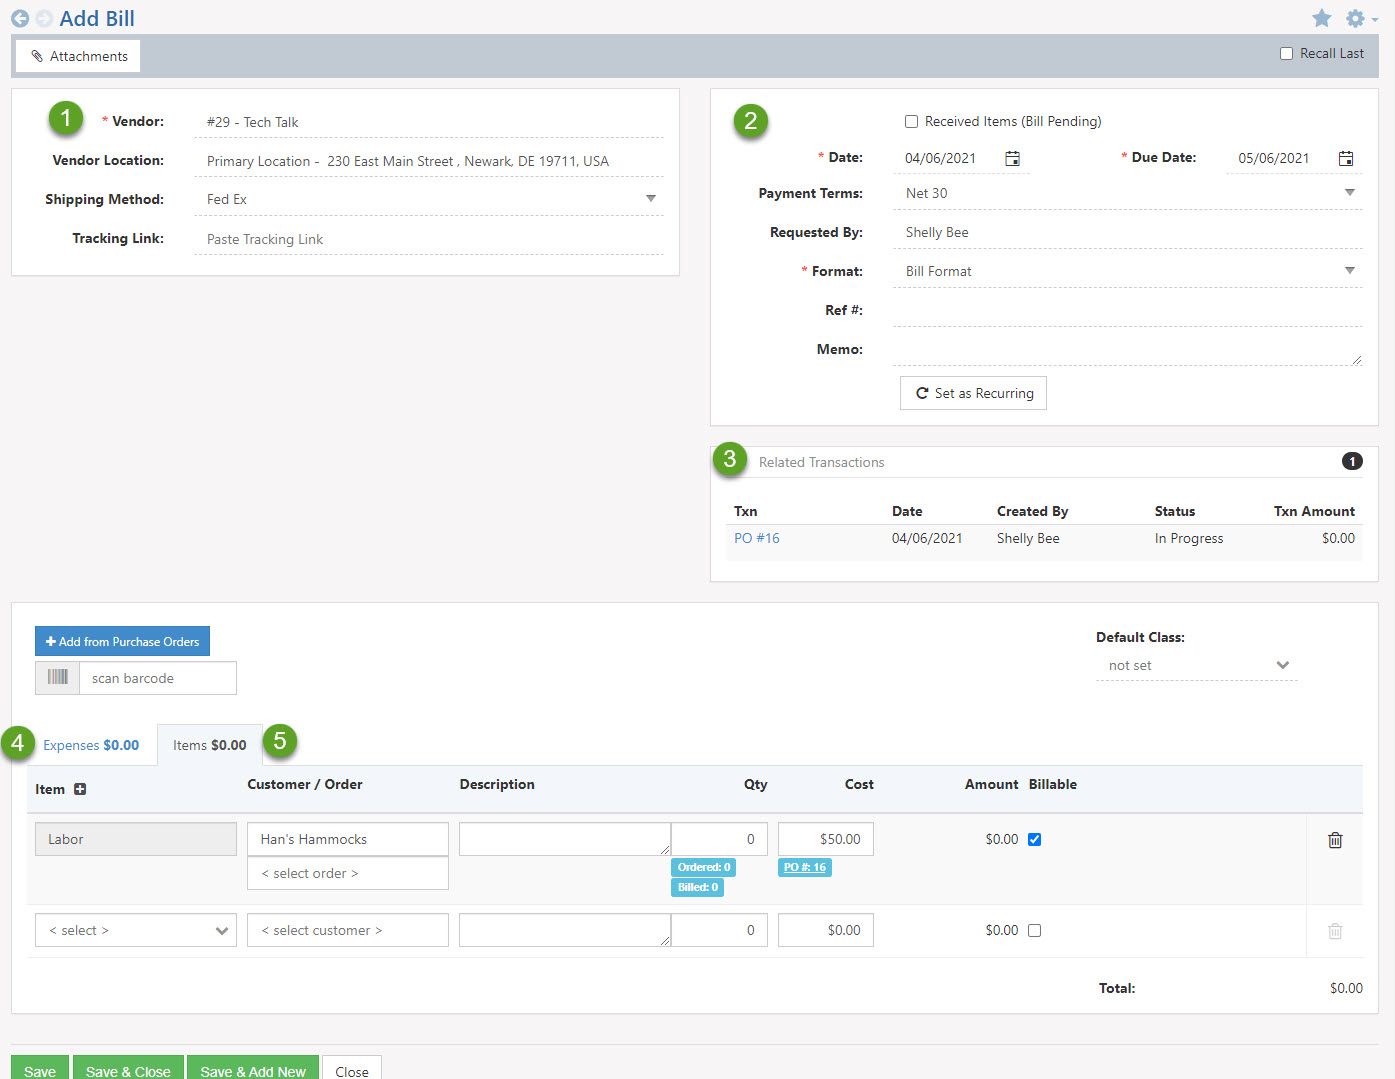 Add Bill page including vendor info, PO info, related transactions, expenses, items, and total